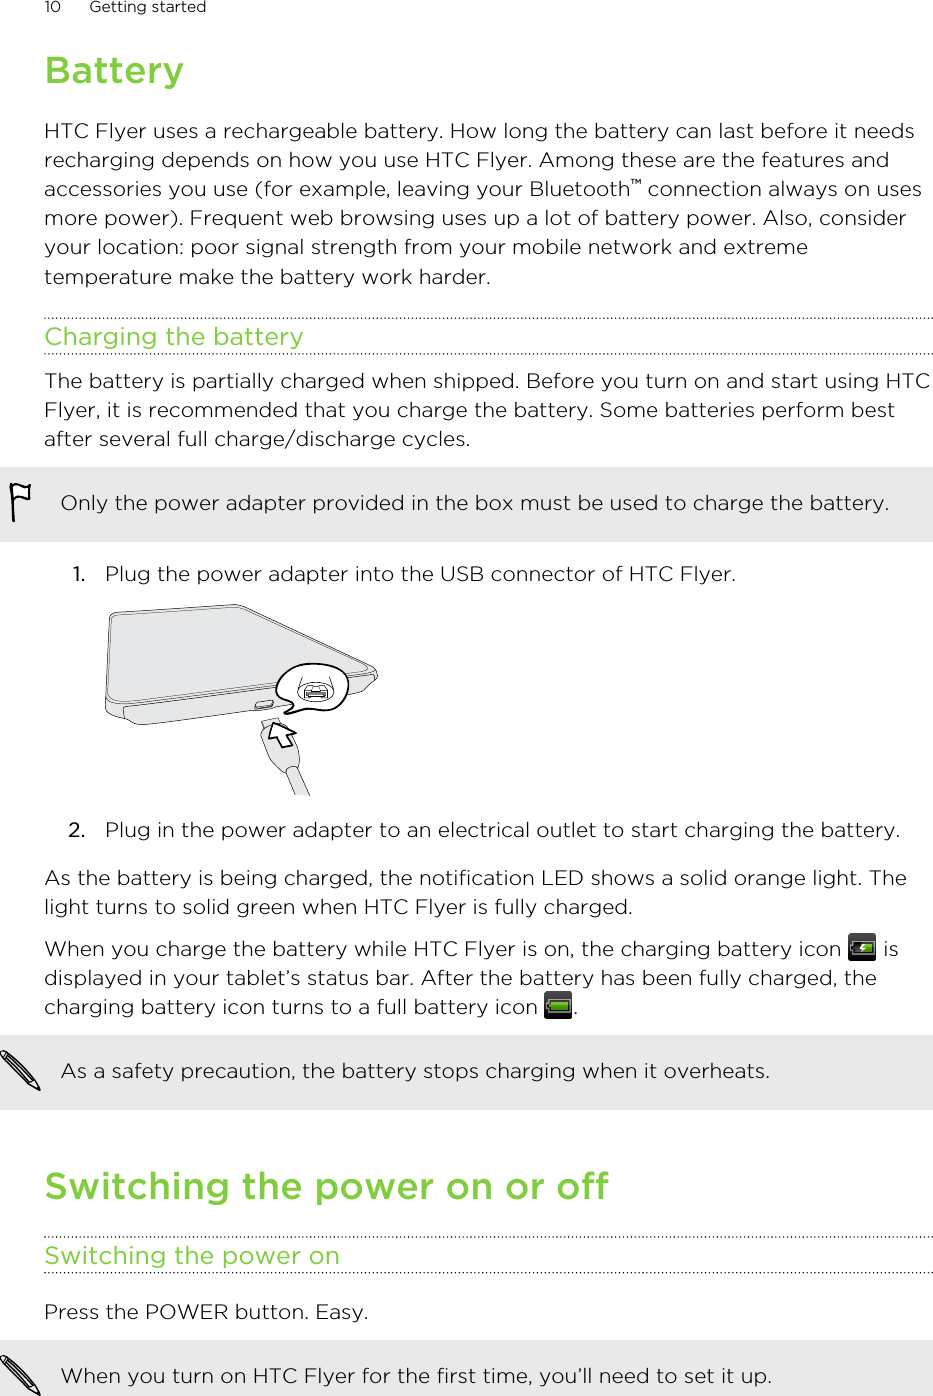 BatteryHTC Flyer uses a rechargeable battery. How long the battery can last before it needsrecharging depends on how you use HTC Flyer. Among these are the features andaccessories you use (for example, leaving your Bluetooth™ connection always on usesmore power). Frequent web browsing uses up a lot of battery power. Also, consideryour location: poor signal strength from your mobile network and extremetemperature make the battery work harder.Charging the batteryThe battery is partially charged when shipped. Before you turn on and start using HTCFlyer, it is recommended that you charge the battery. Some batteries perform bestafter several full charge/discharge cycles.Only the power adapter provided in the box must be used to charge the battery.1. Plug the power adapter into the USB connector of HTC Flyer. 2. Plug in the power adapter to an electrical outlet to start charging the battery.As the battery is being charged, the notification LED shows a solid orange light. Thelight turns to solid green when HTC Flyer is fully charged.When you charge the battery while HTC Flyer is on, the charging battery icon   isdisplayed in your tablet’s status bar. After the battery has been fully charged, thecharging battery icon turns to a full battery icon  .As a safety precaution, the battery stops charging when it overheats.Switching the power on or offSwitching the power onPress the POWER button. Easy. When you turn on HTC Flyer for the first time, you’ll need to set it up.10 Getting started